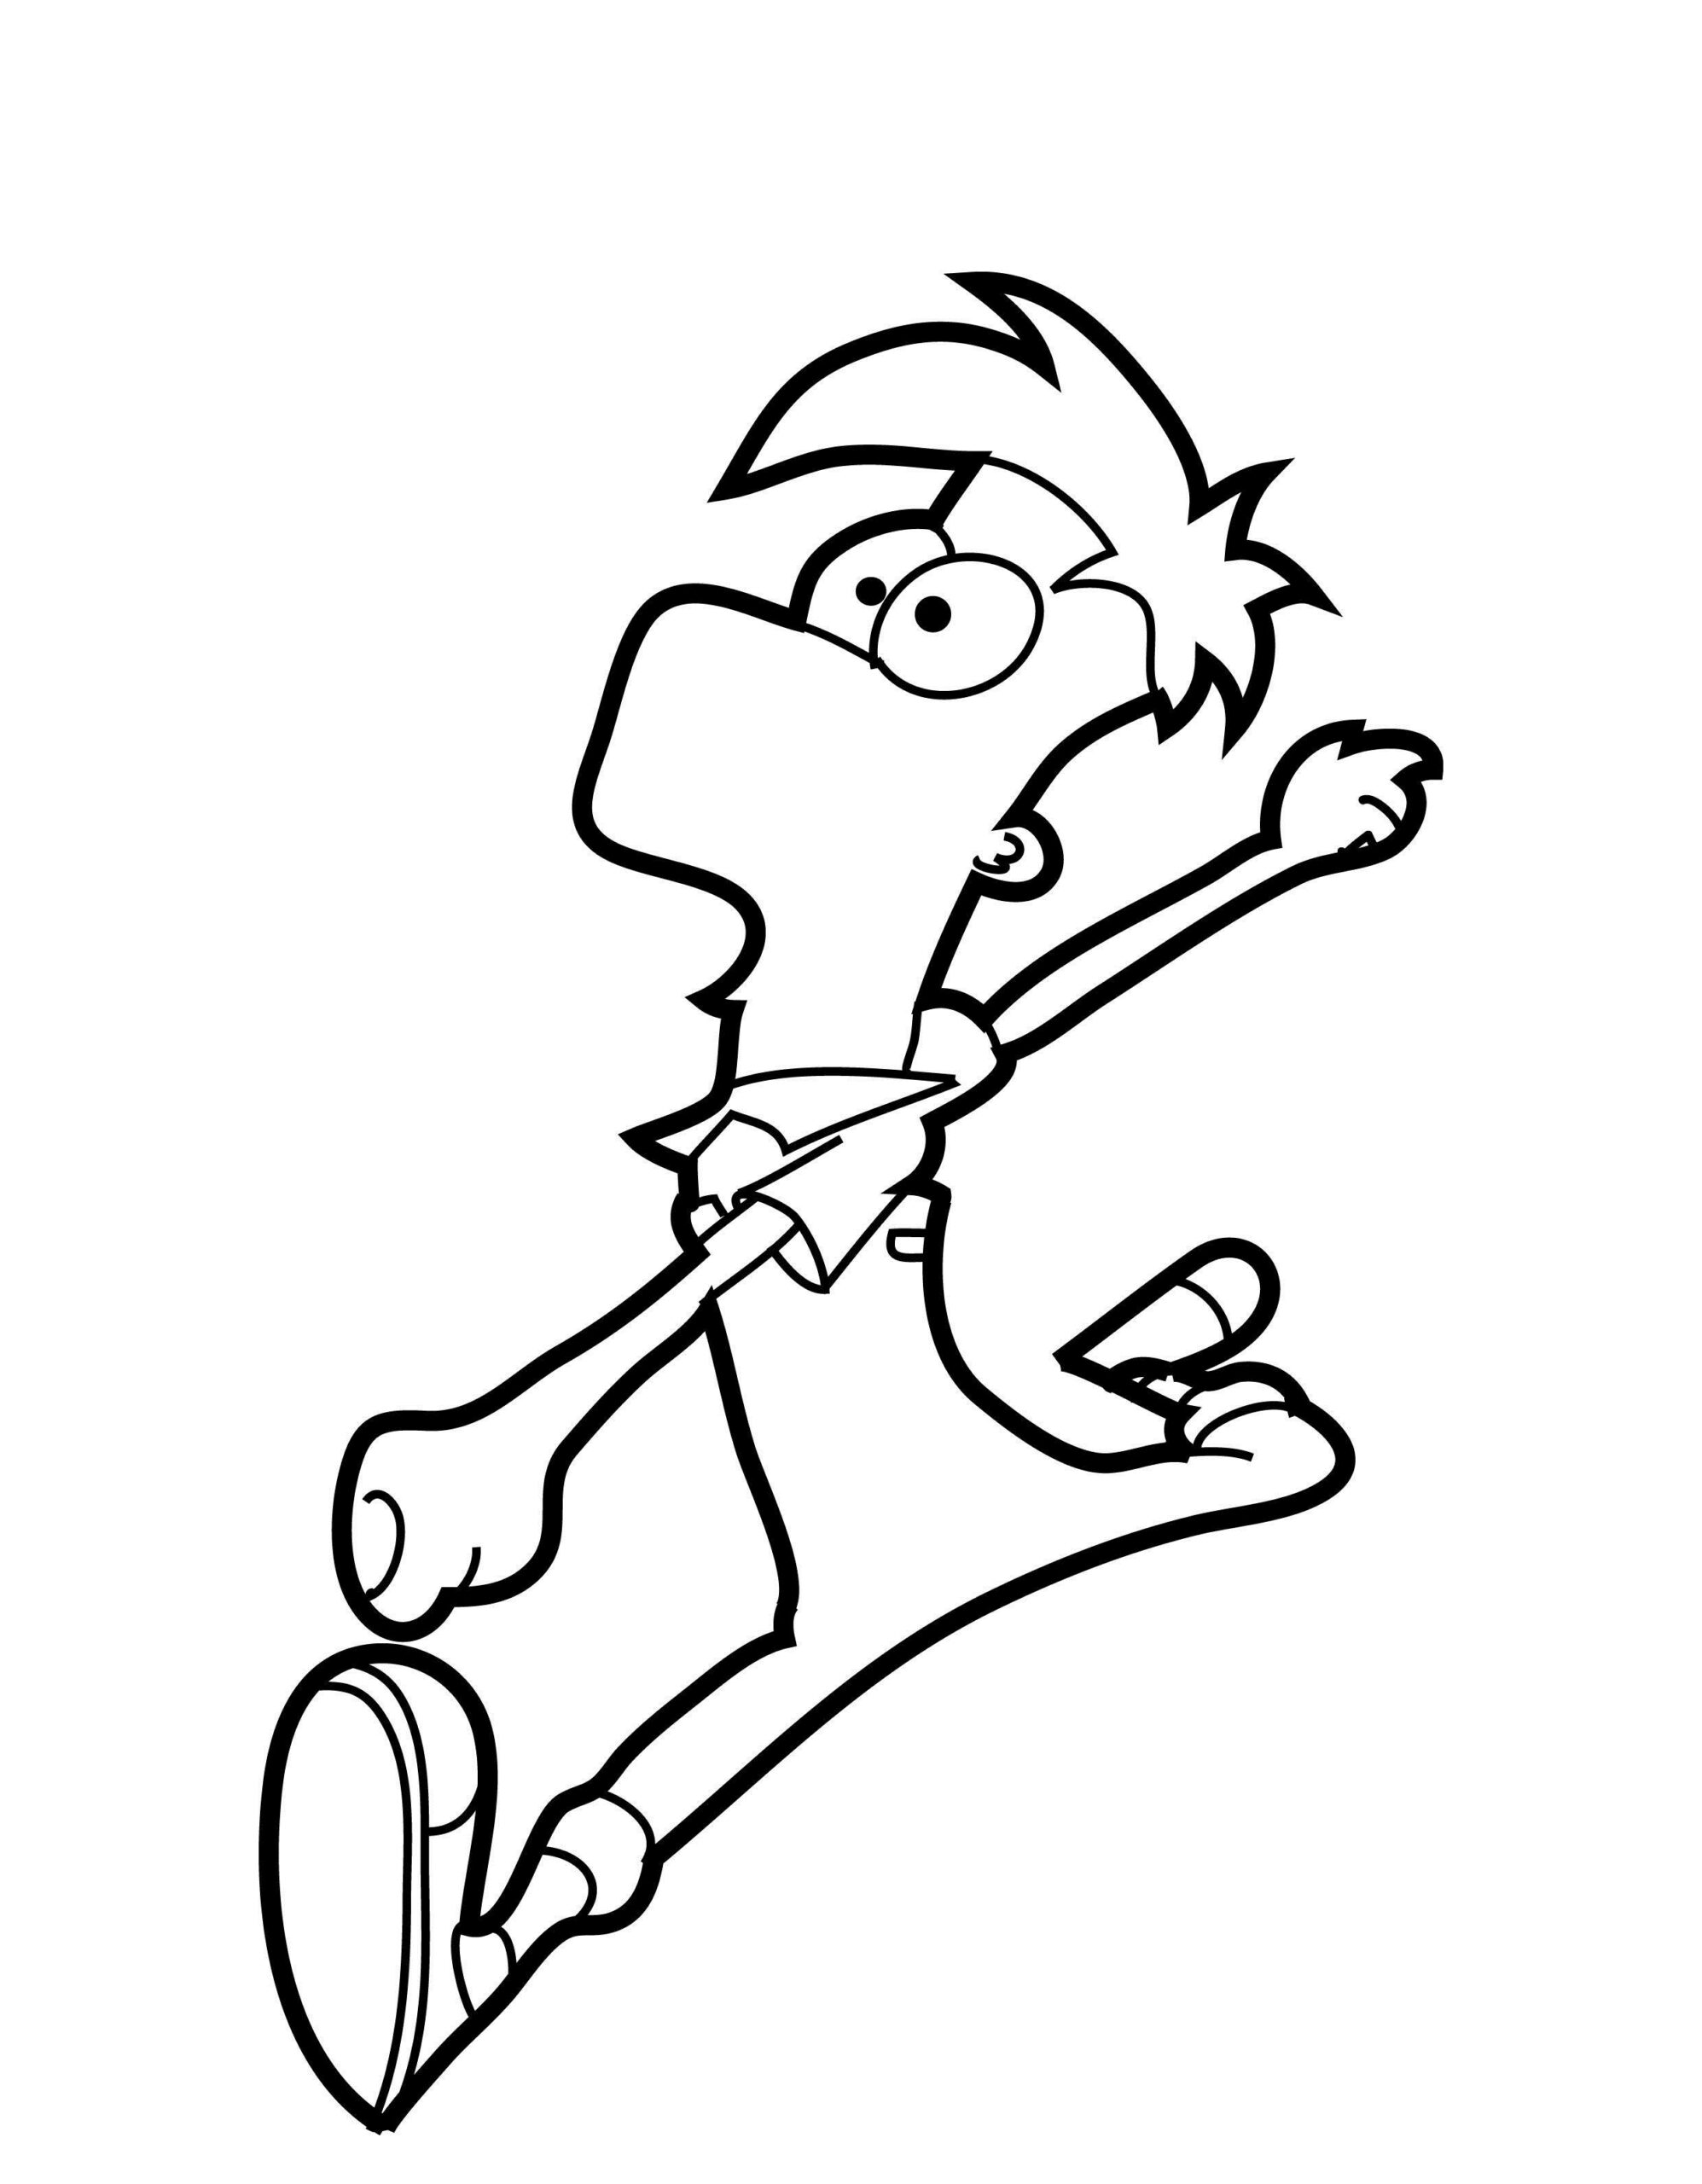 ferb and phineas coloring pages